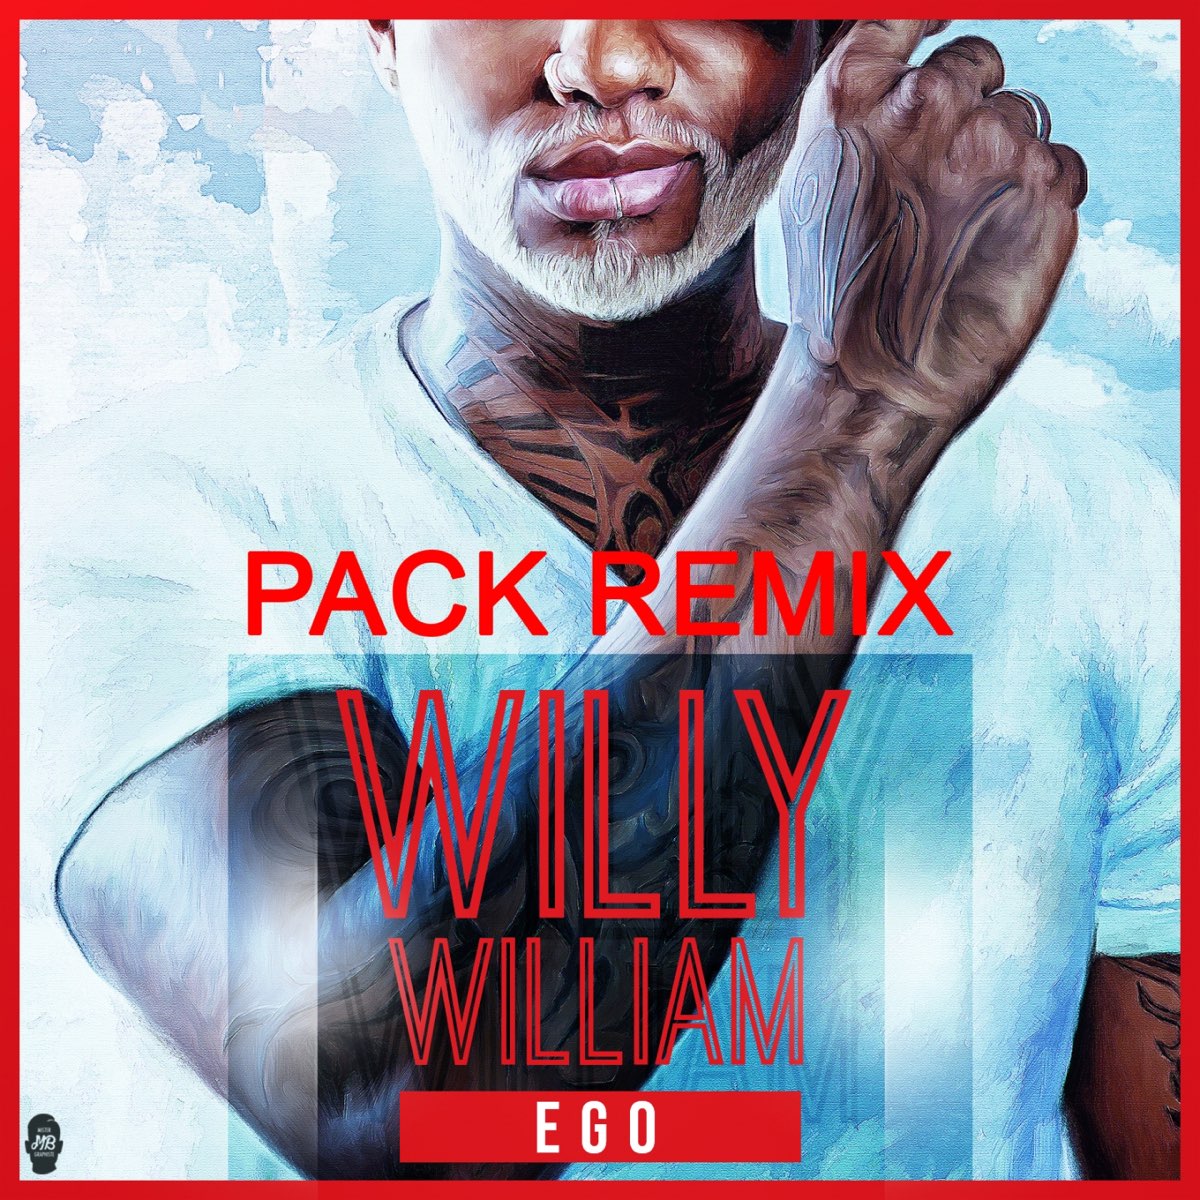 Ego (Remixes) by Willy William on Apple Music